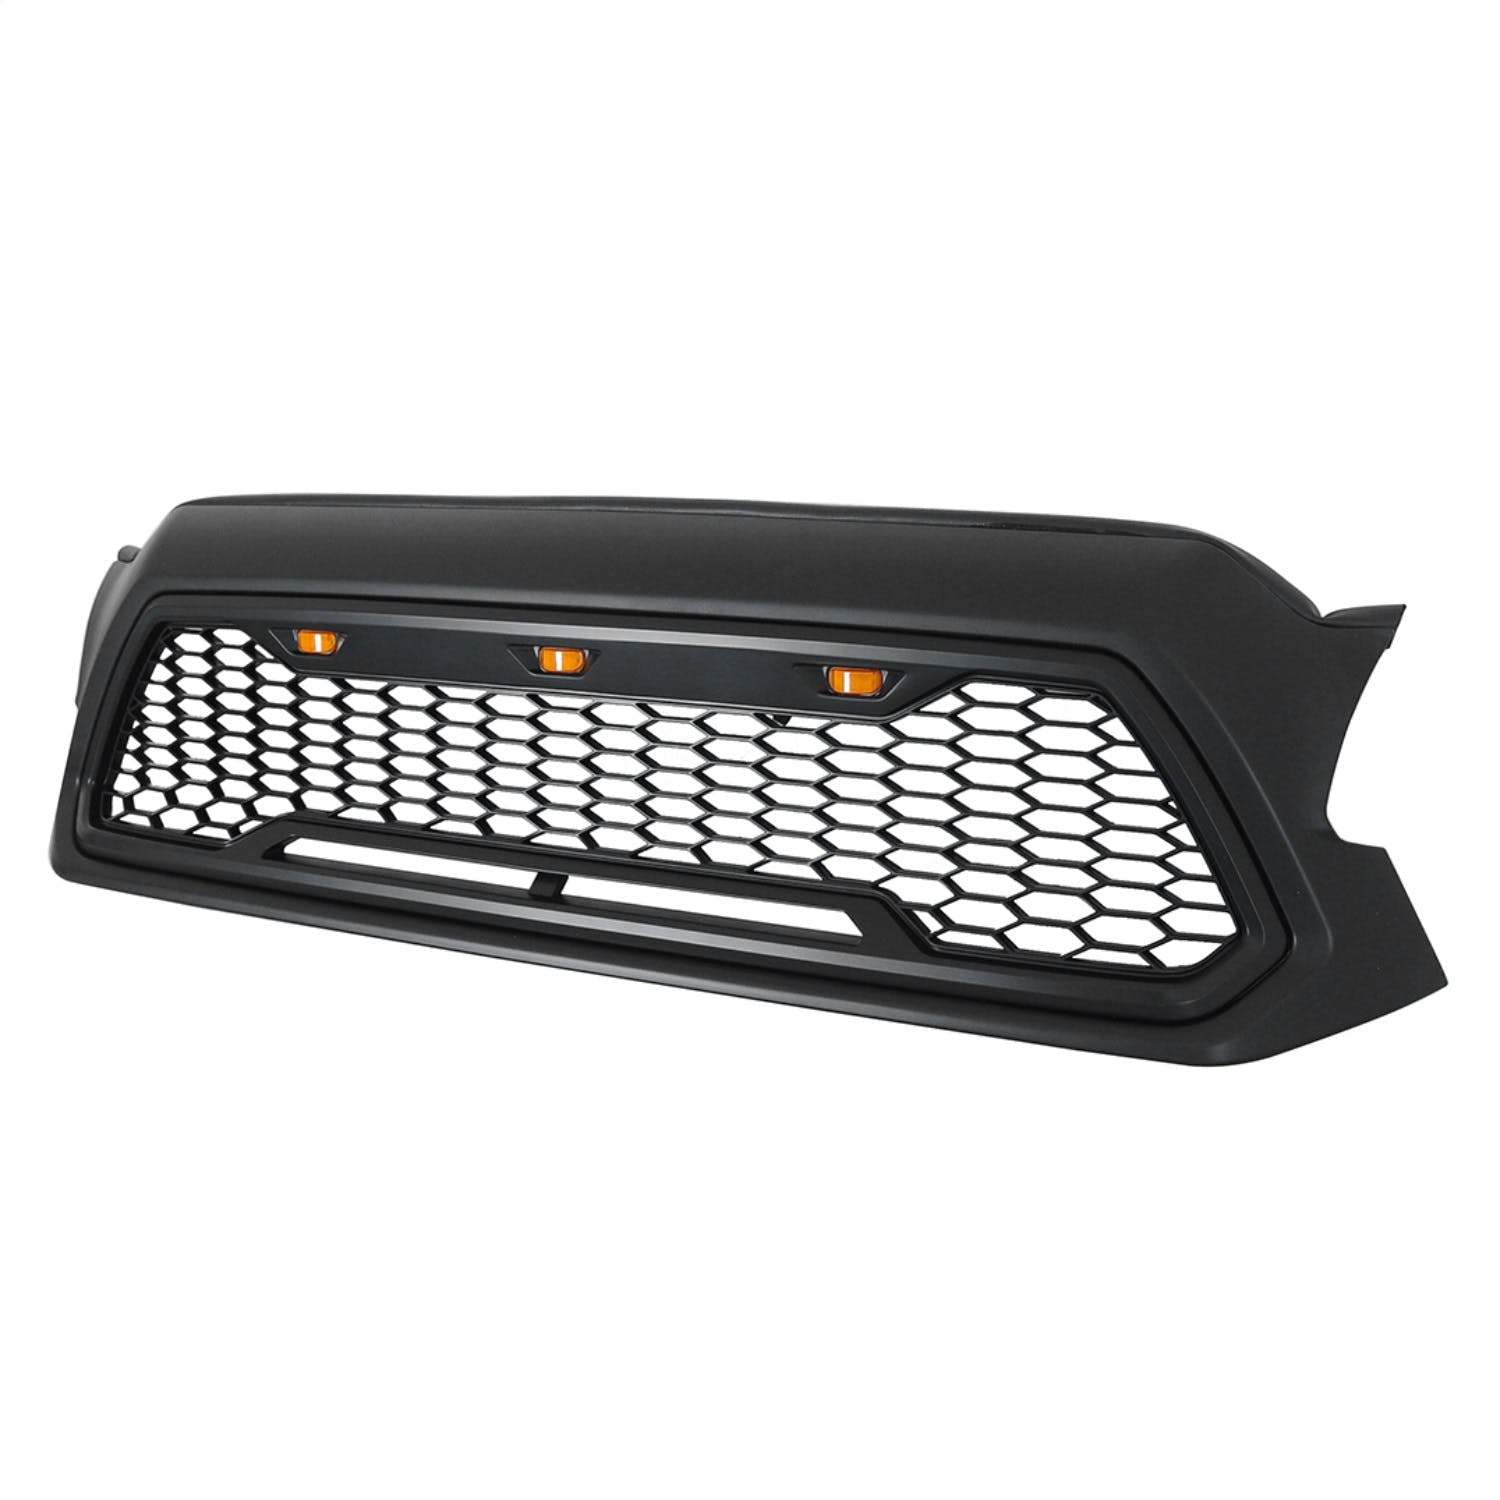 Paramount Automotive 41-0201MB Impulse Packaged Grille, ABS LED, Meta Black